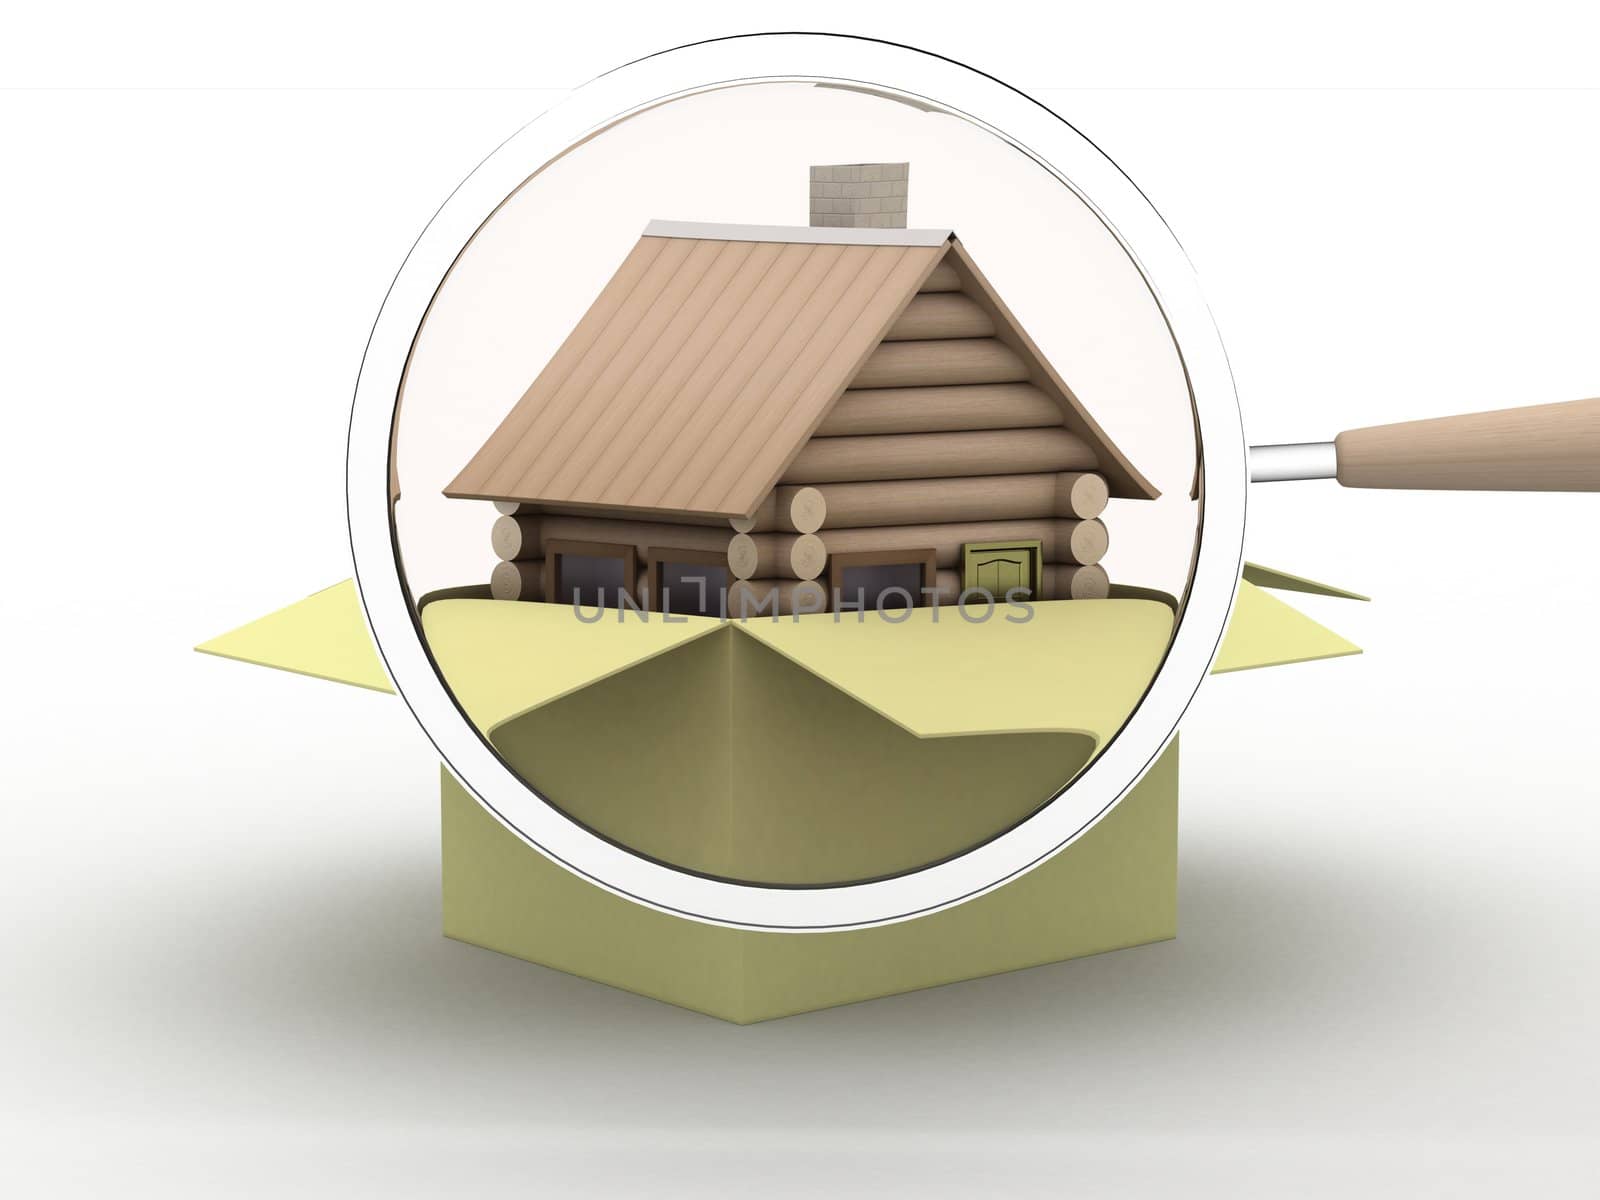 Wooden small house in a box. 3D image.